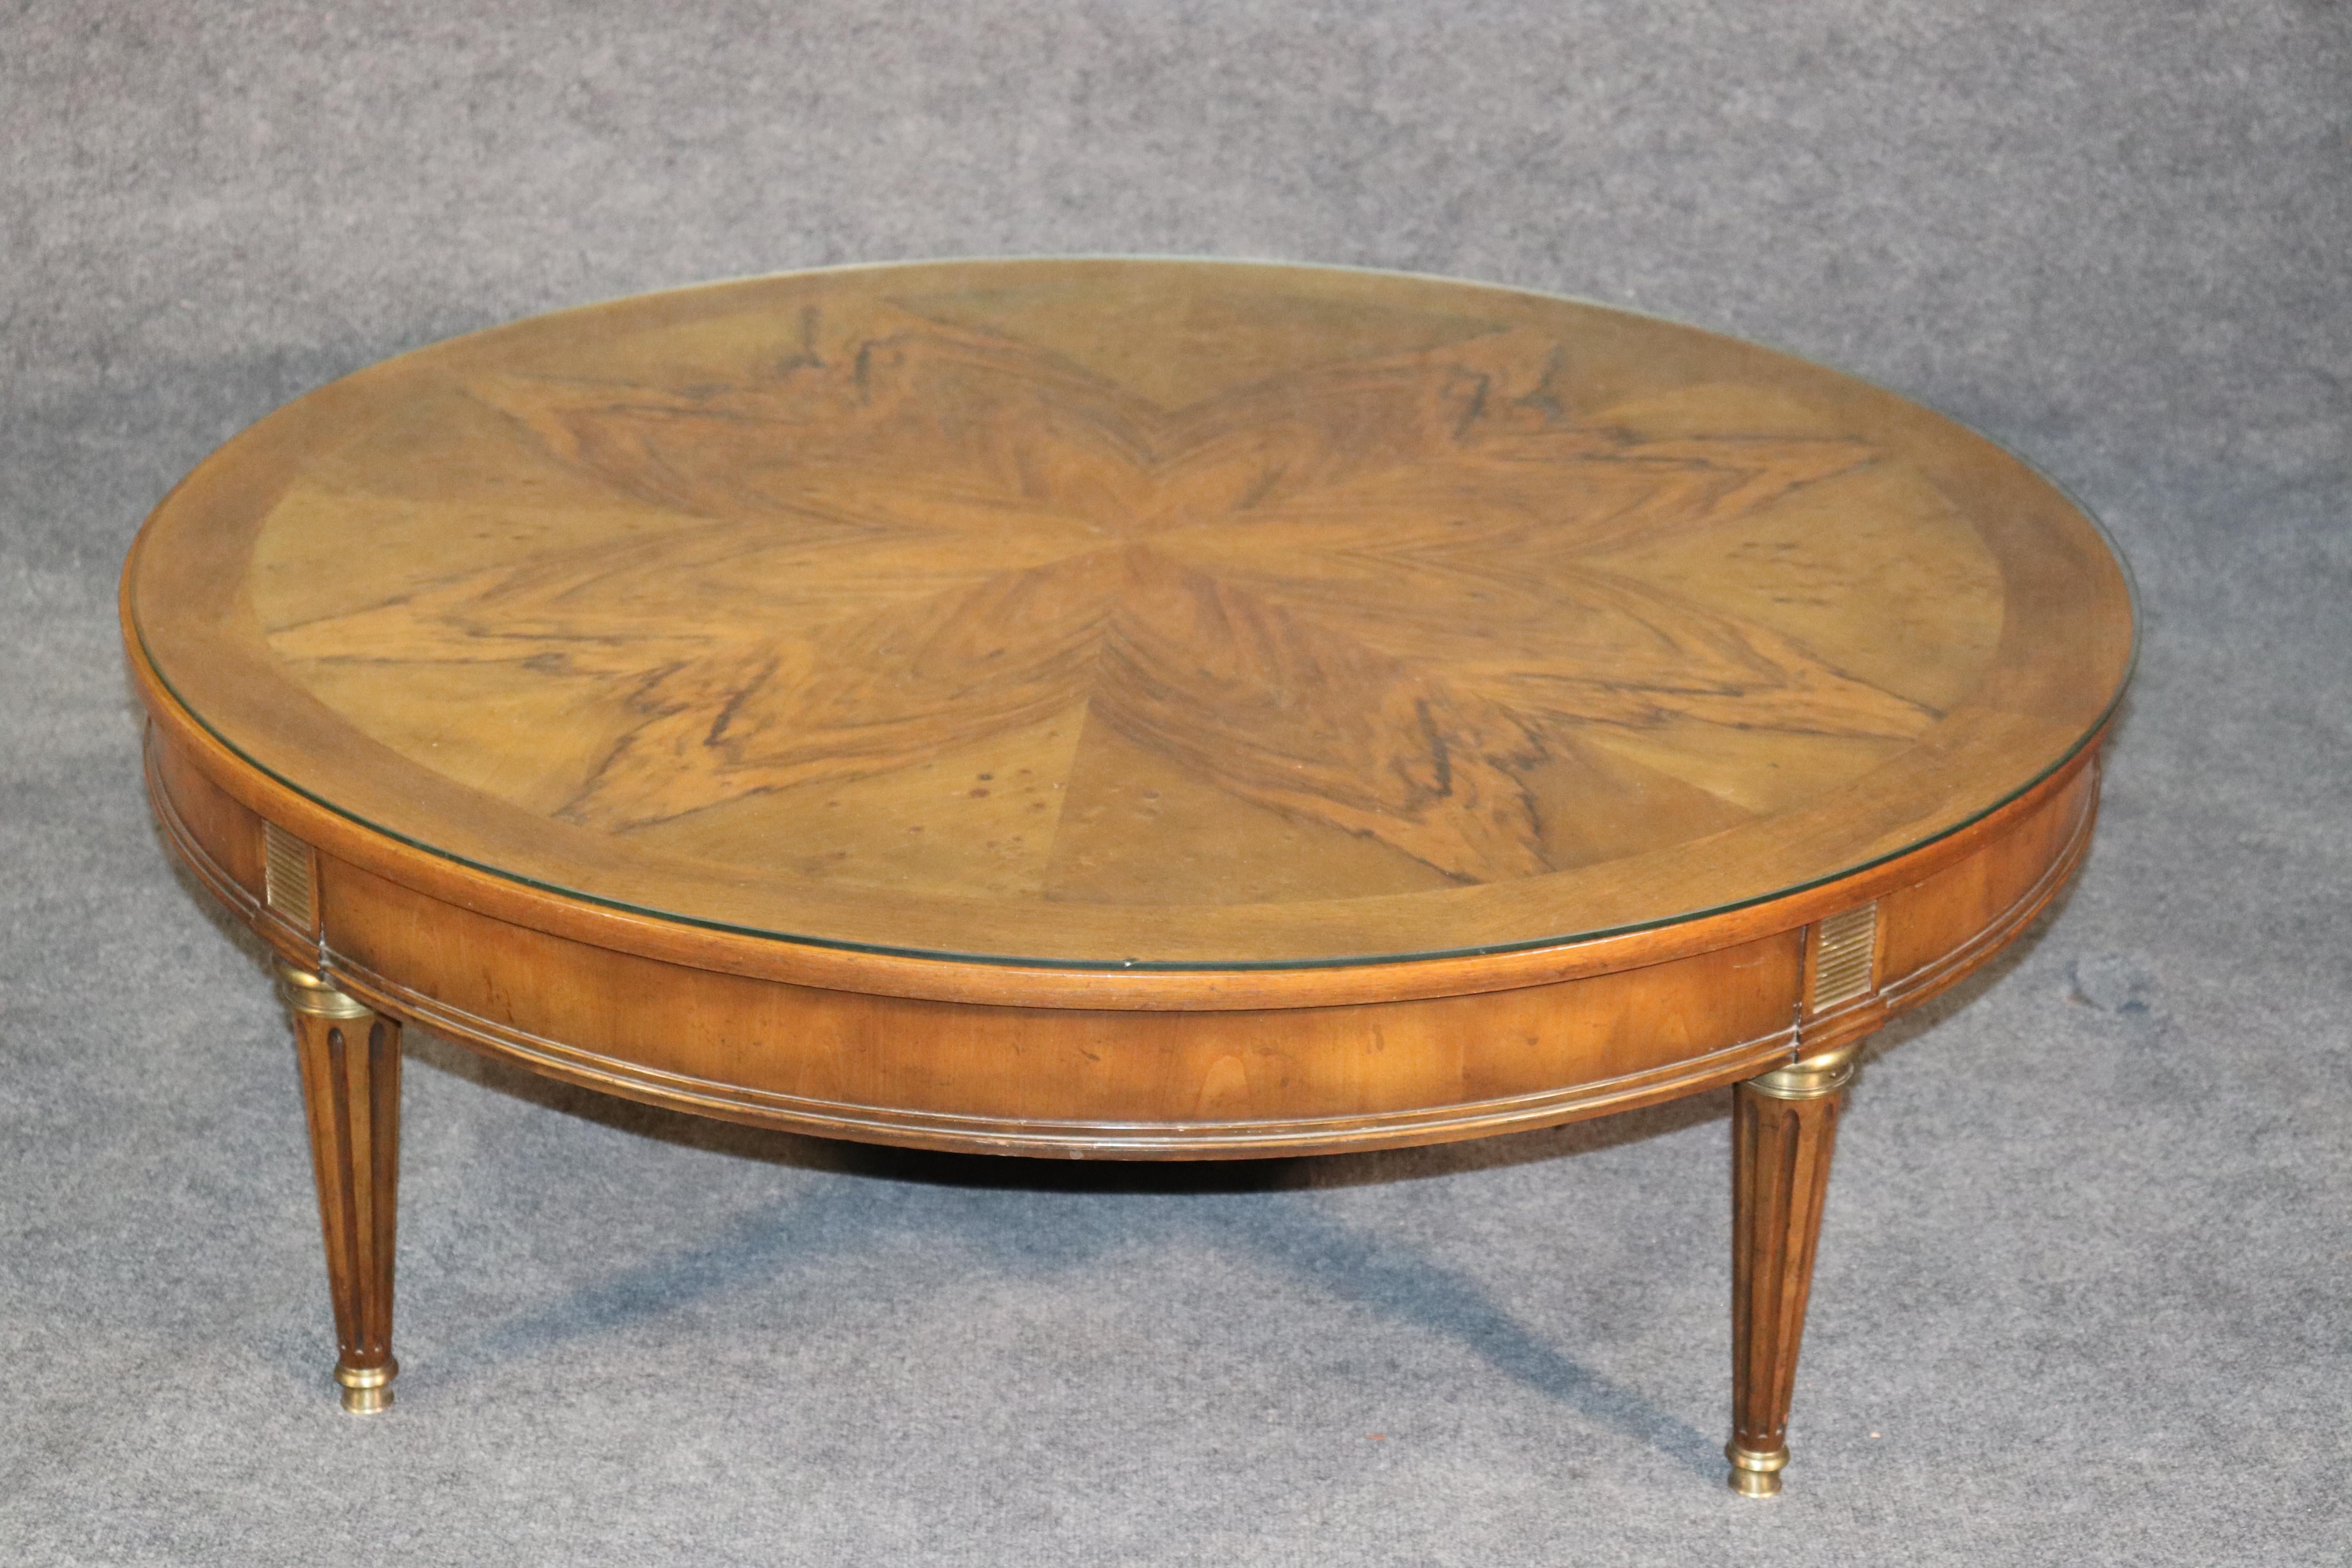 This is a beautiful light walnut 48 x 48 x 16 inch tall Baker coffee table. The table is in good condition and is a lighter tone walnut. The brass details add just a touch of bling to an otherwise understated form. Dates to the 1960s era.